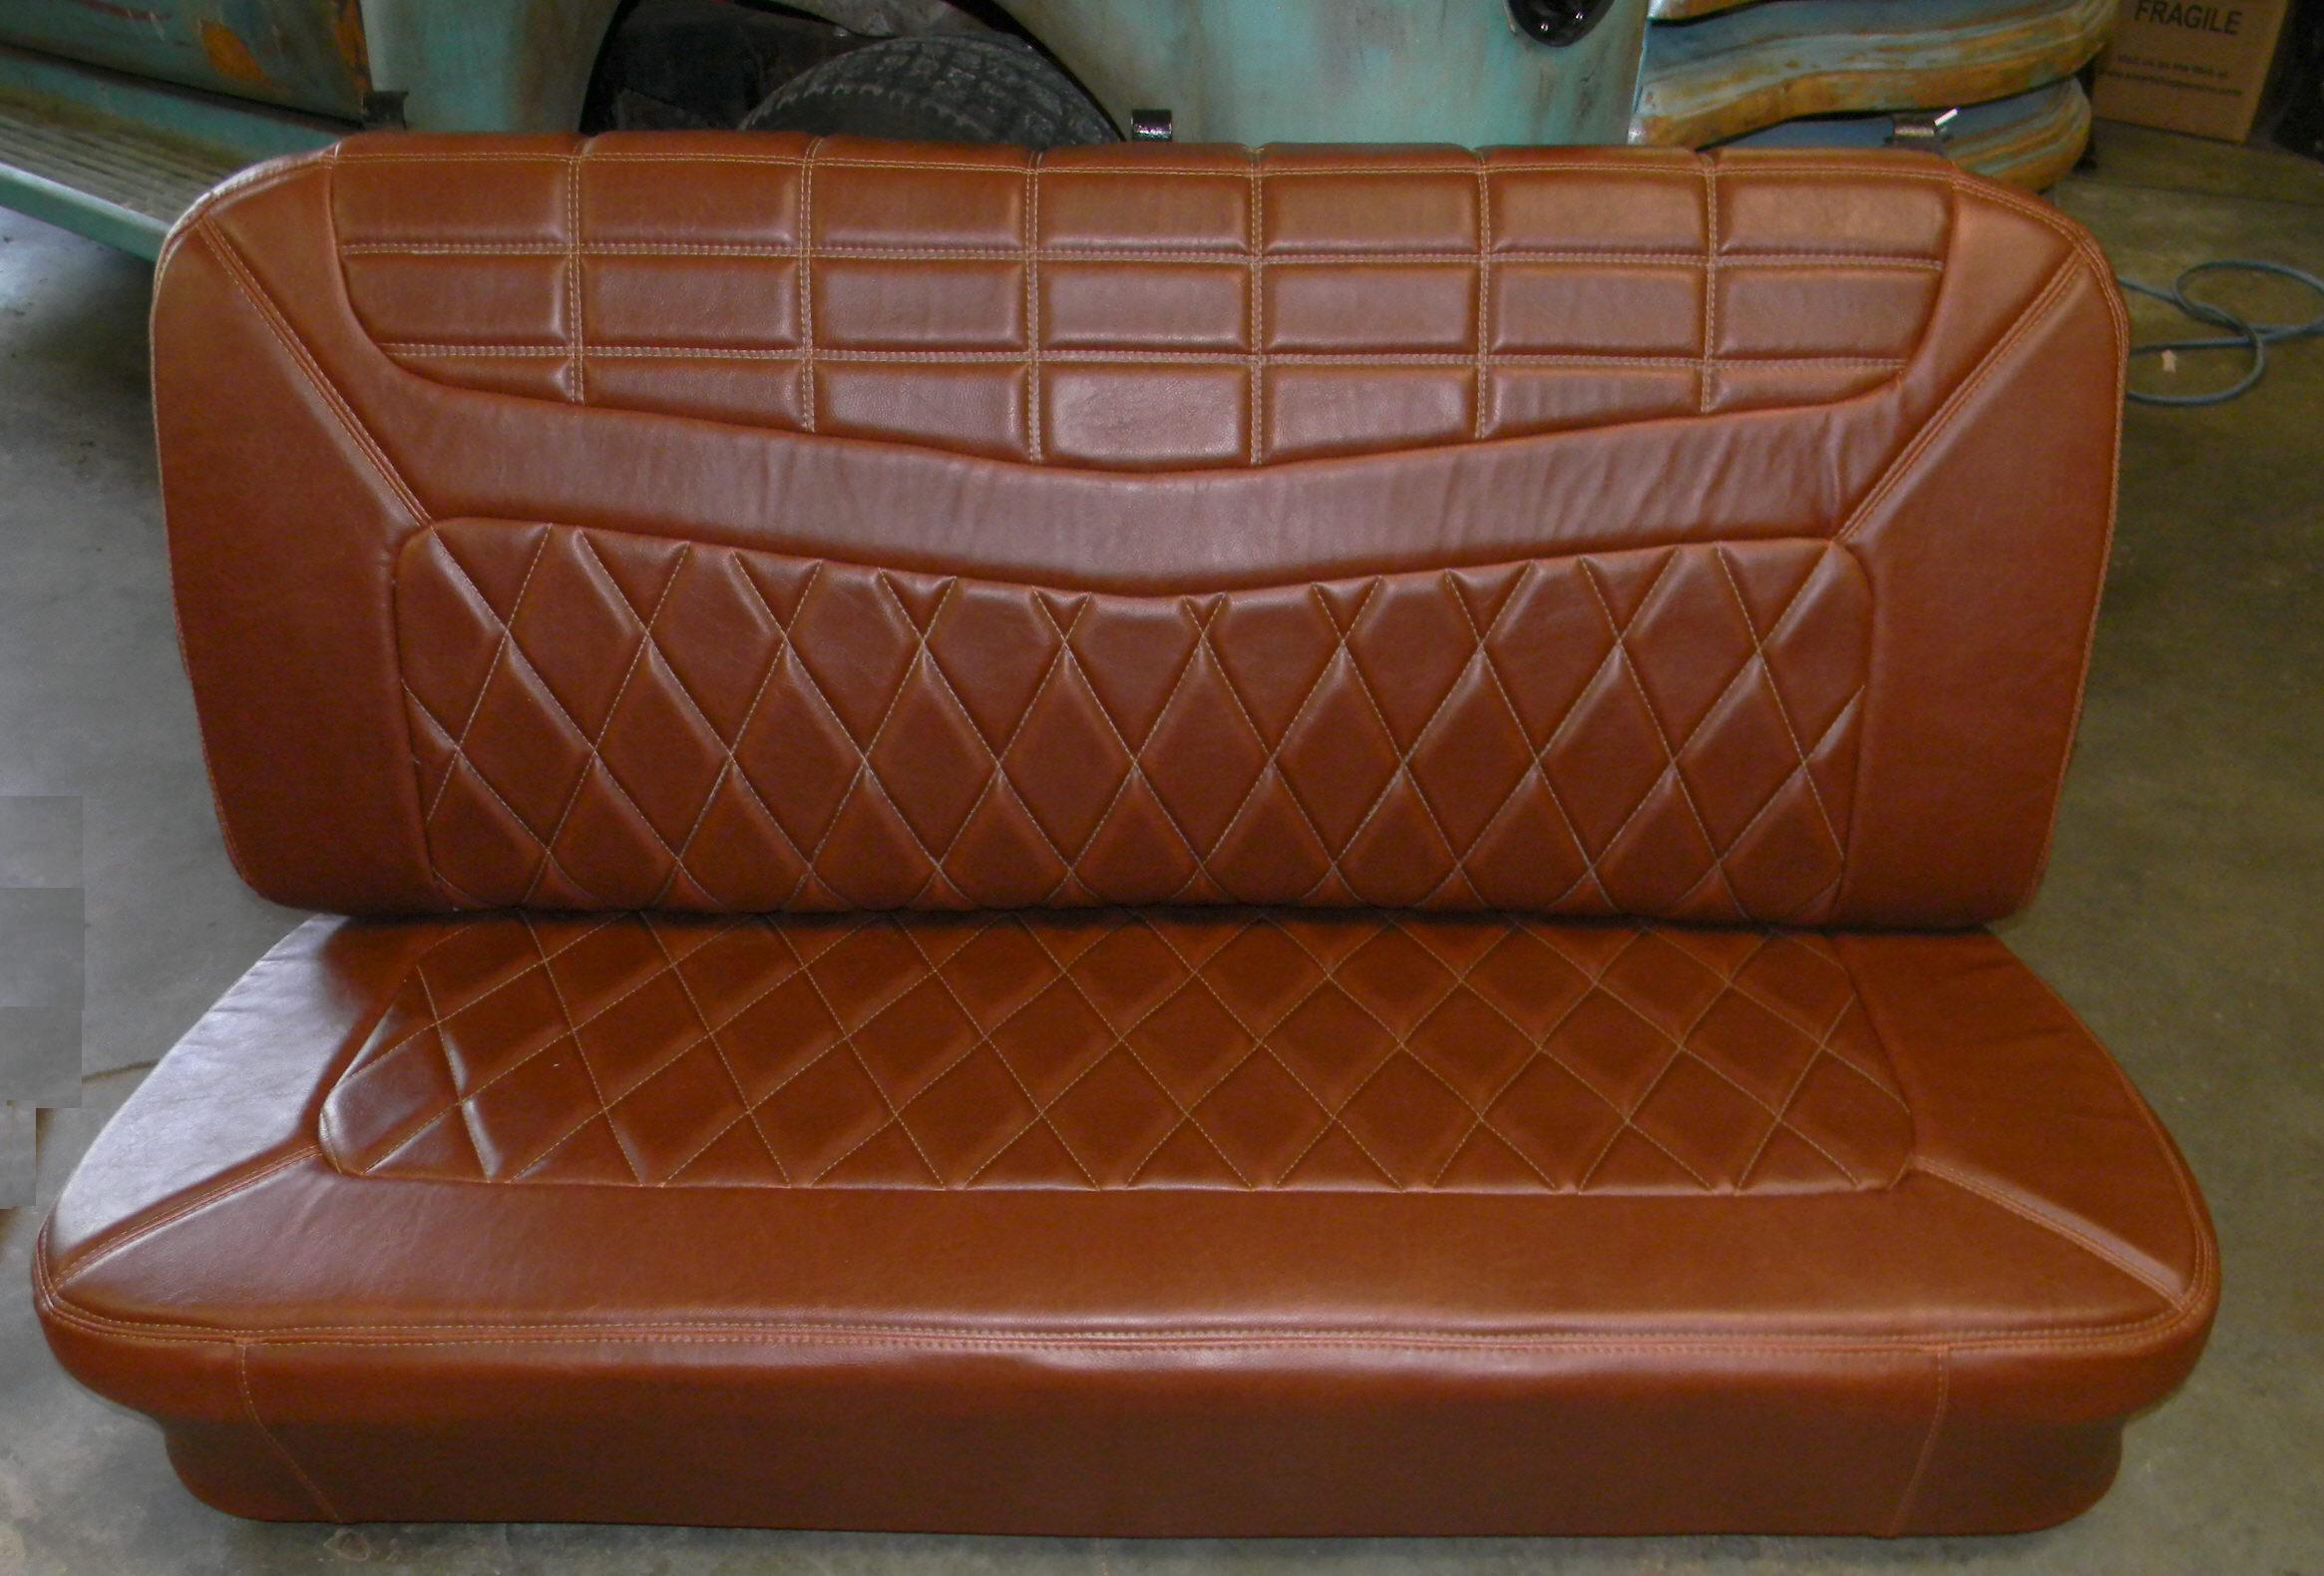 Chevy Truck Bench Seat Covers